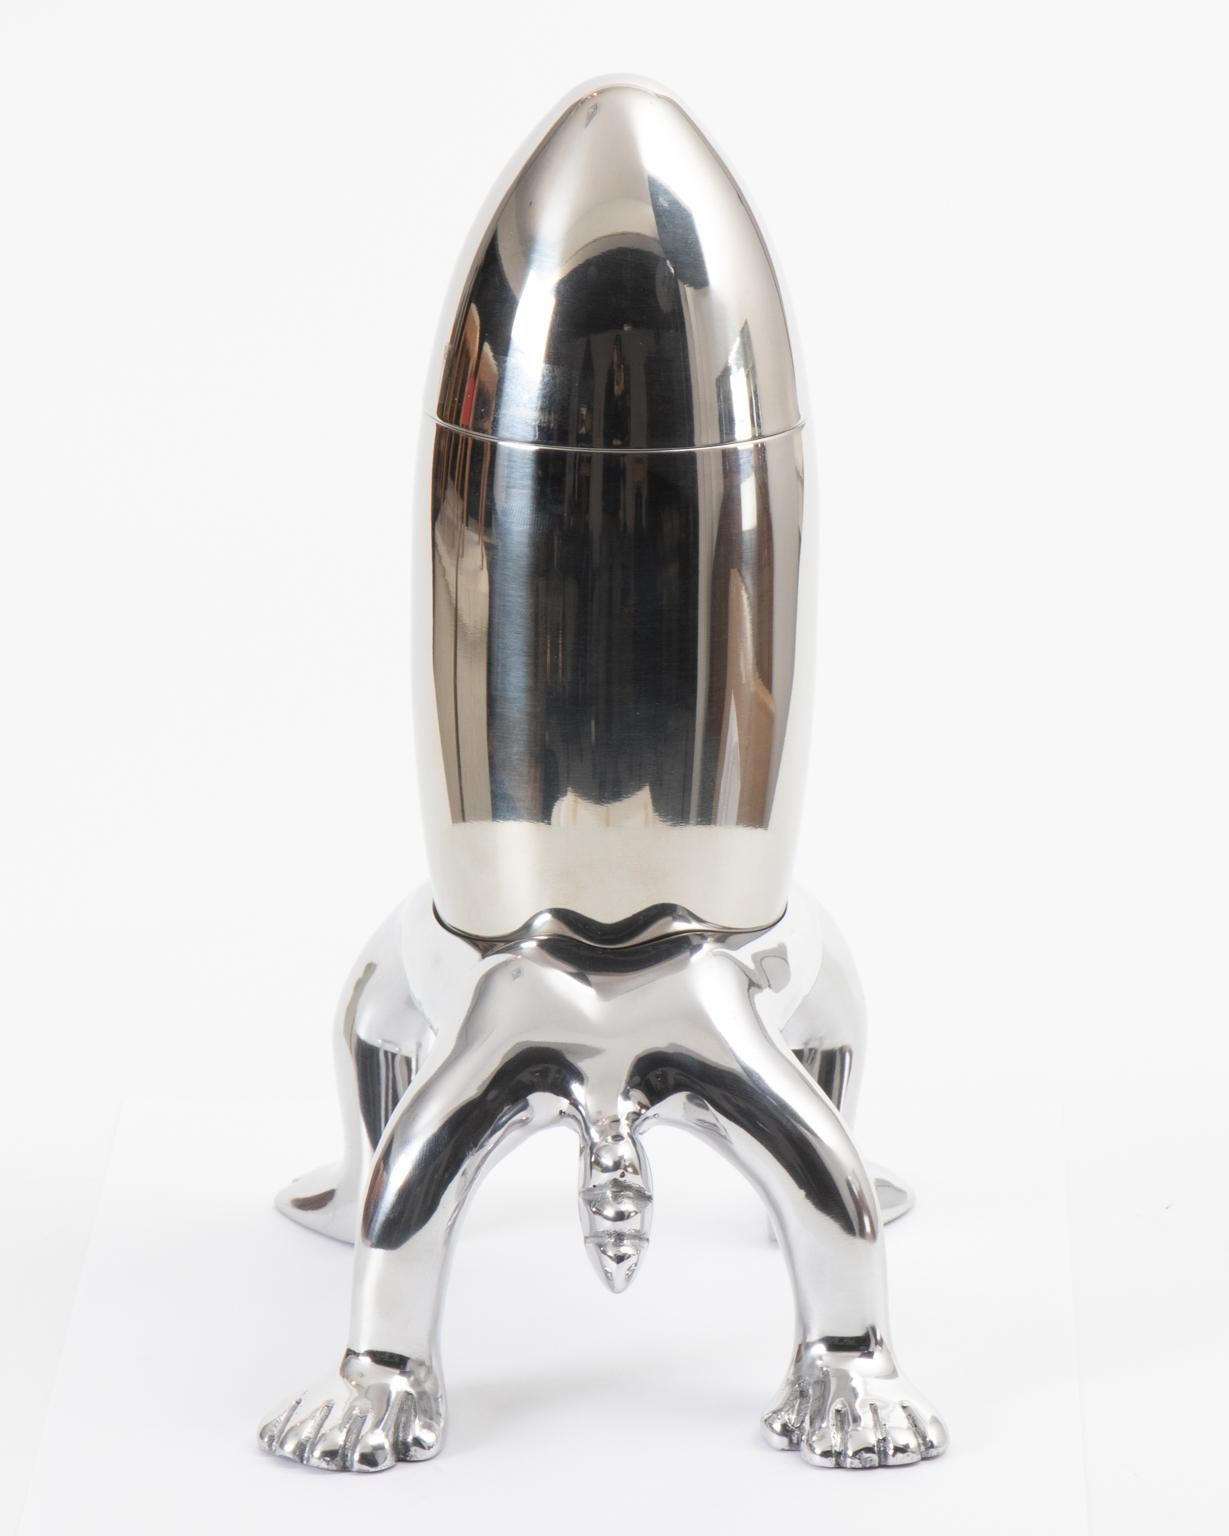 Handmade stainless steel cocktail shaker with aluminum base crafted by South African sculptor Carrol Boyes, circa 2000. Please note of wear consistent with age. The piece features a polished finish.